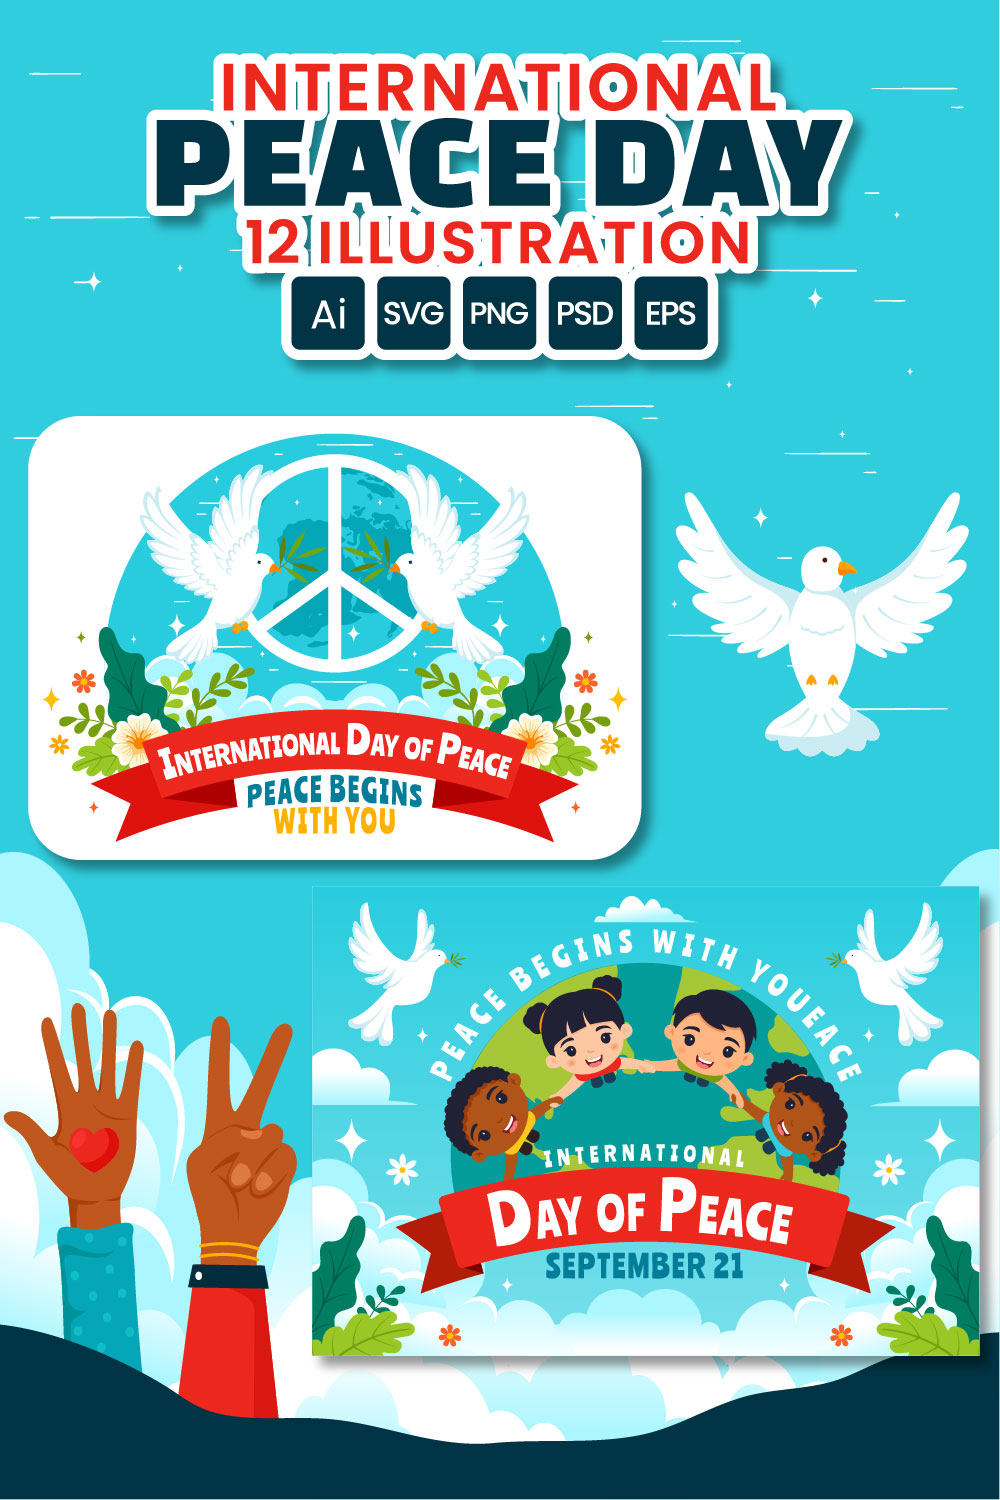 12 International Peace Day Illustration pinterest preview image.